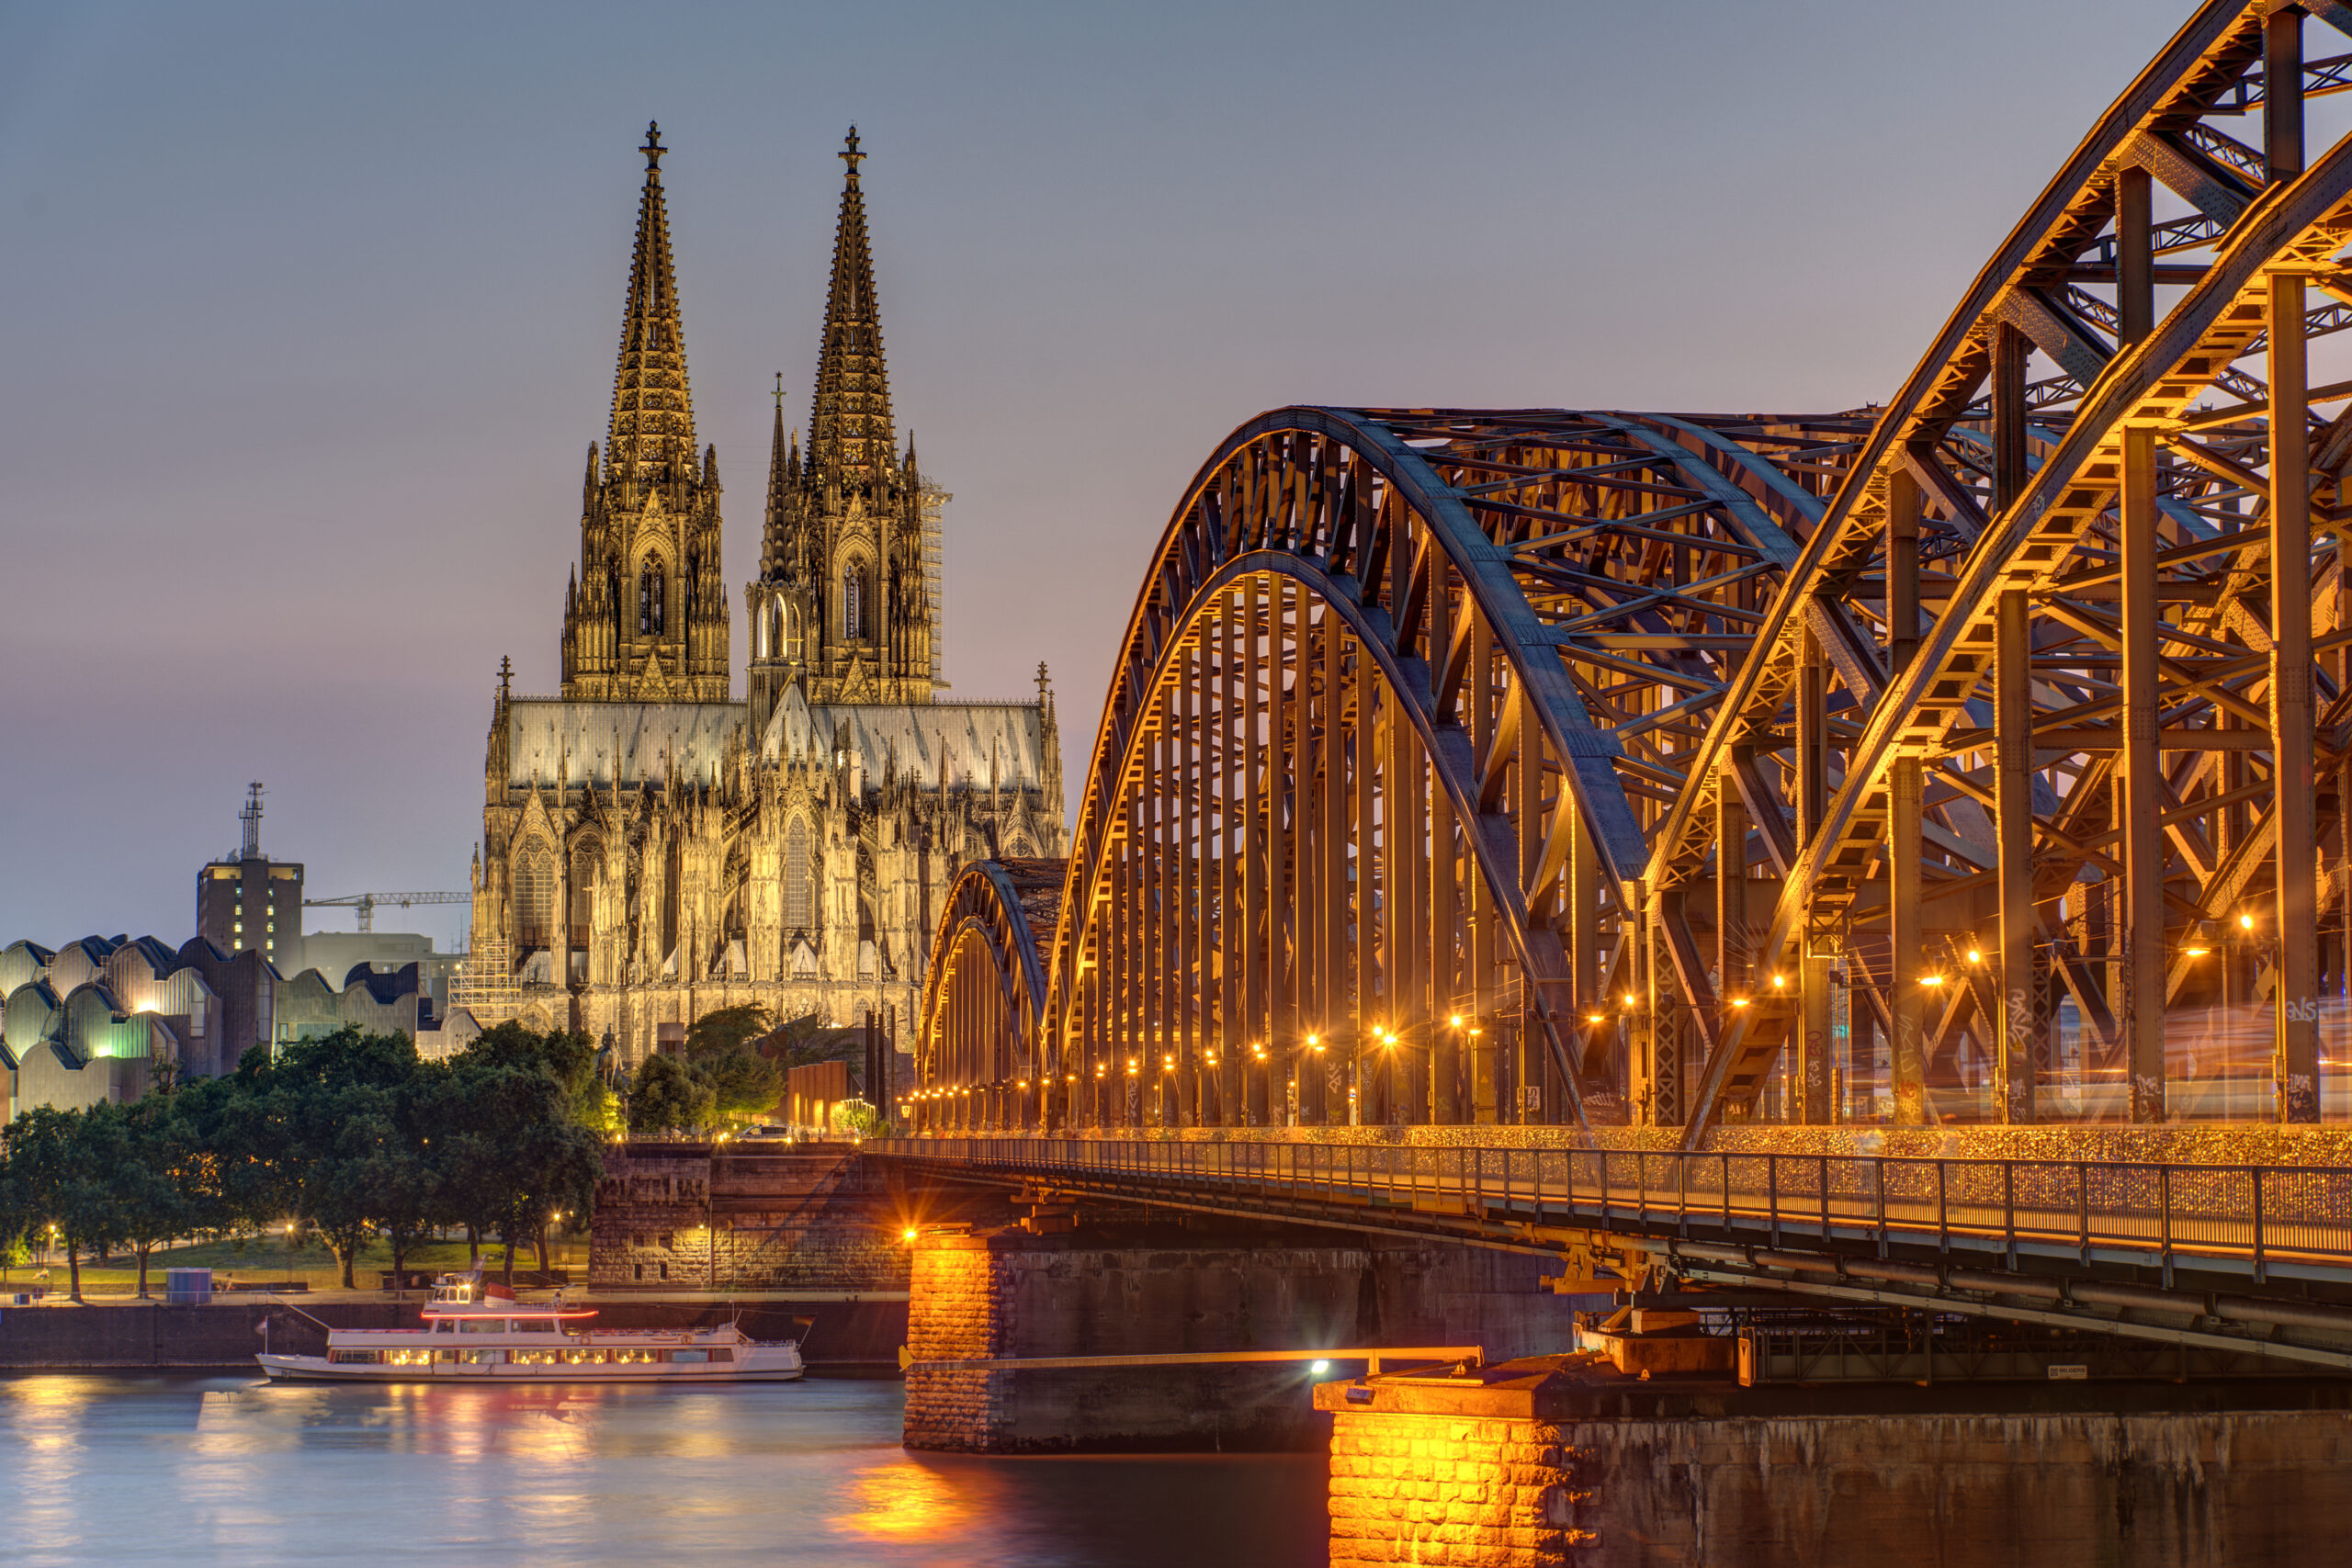 Shows Cologne Cathedral